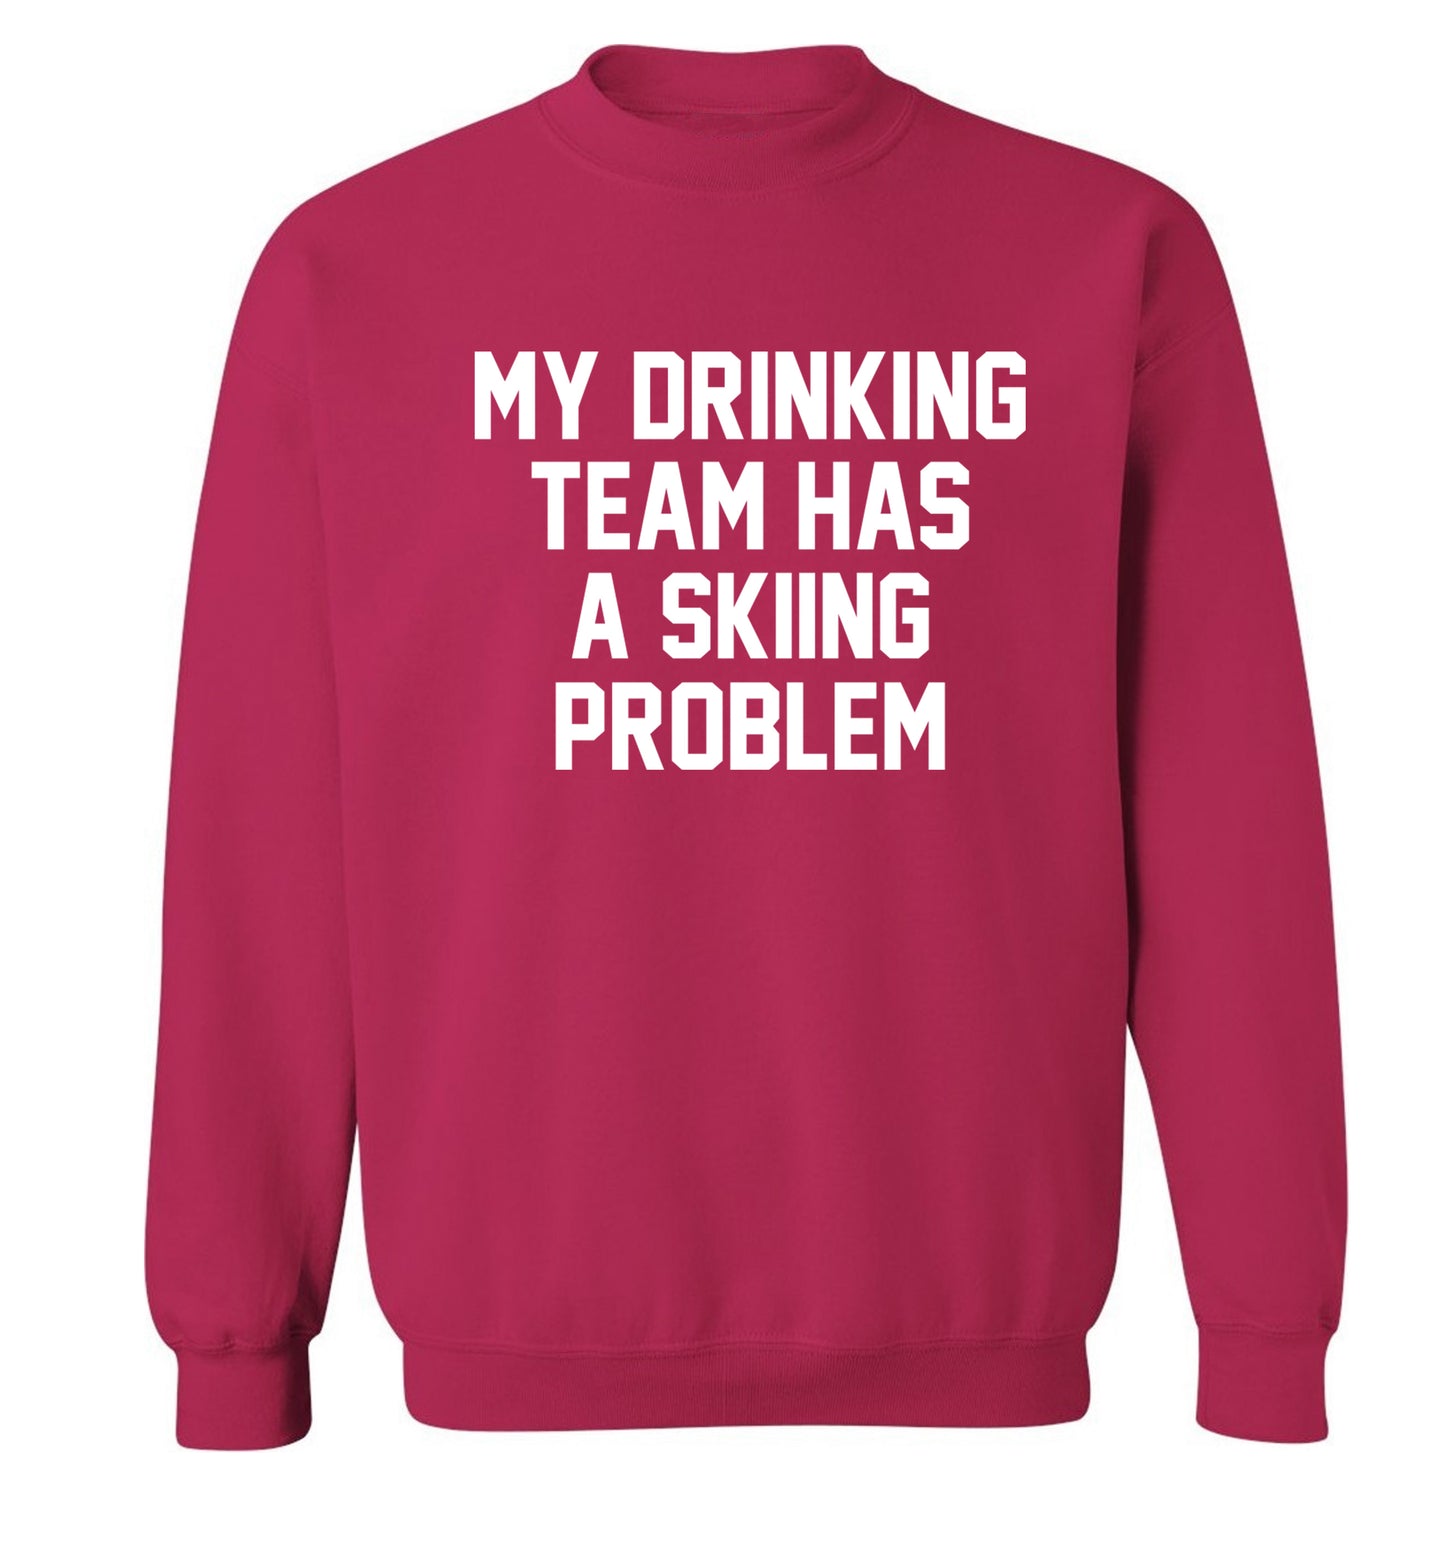 My drinking team has a skiing problem Adult's unisexpink Sweater 2XL